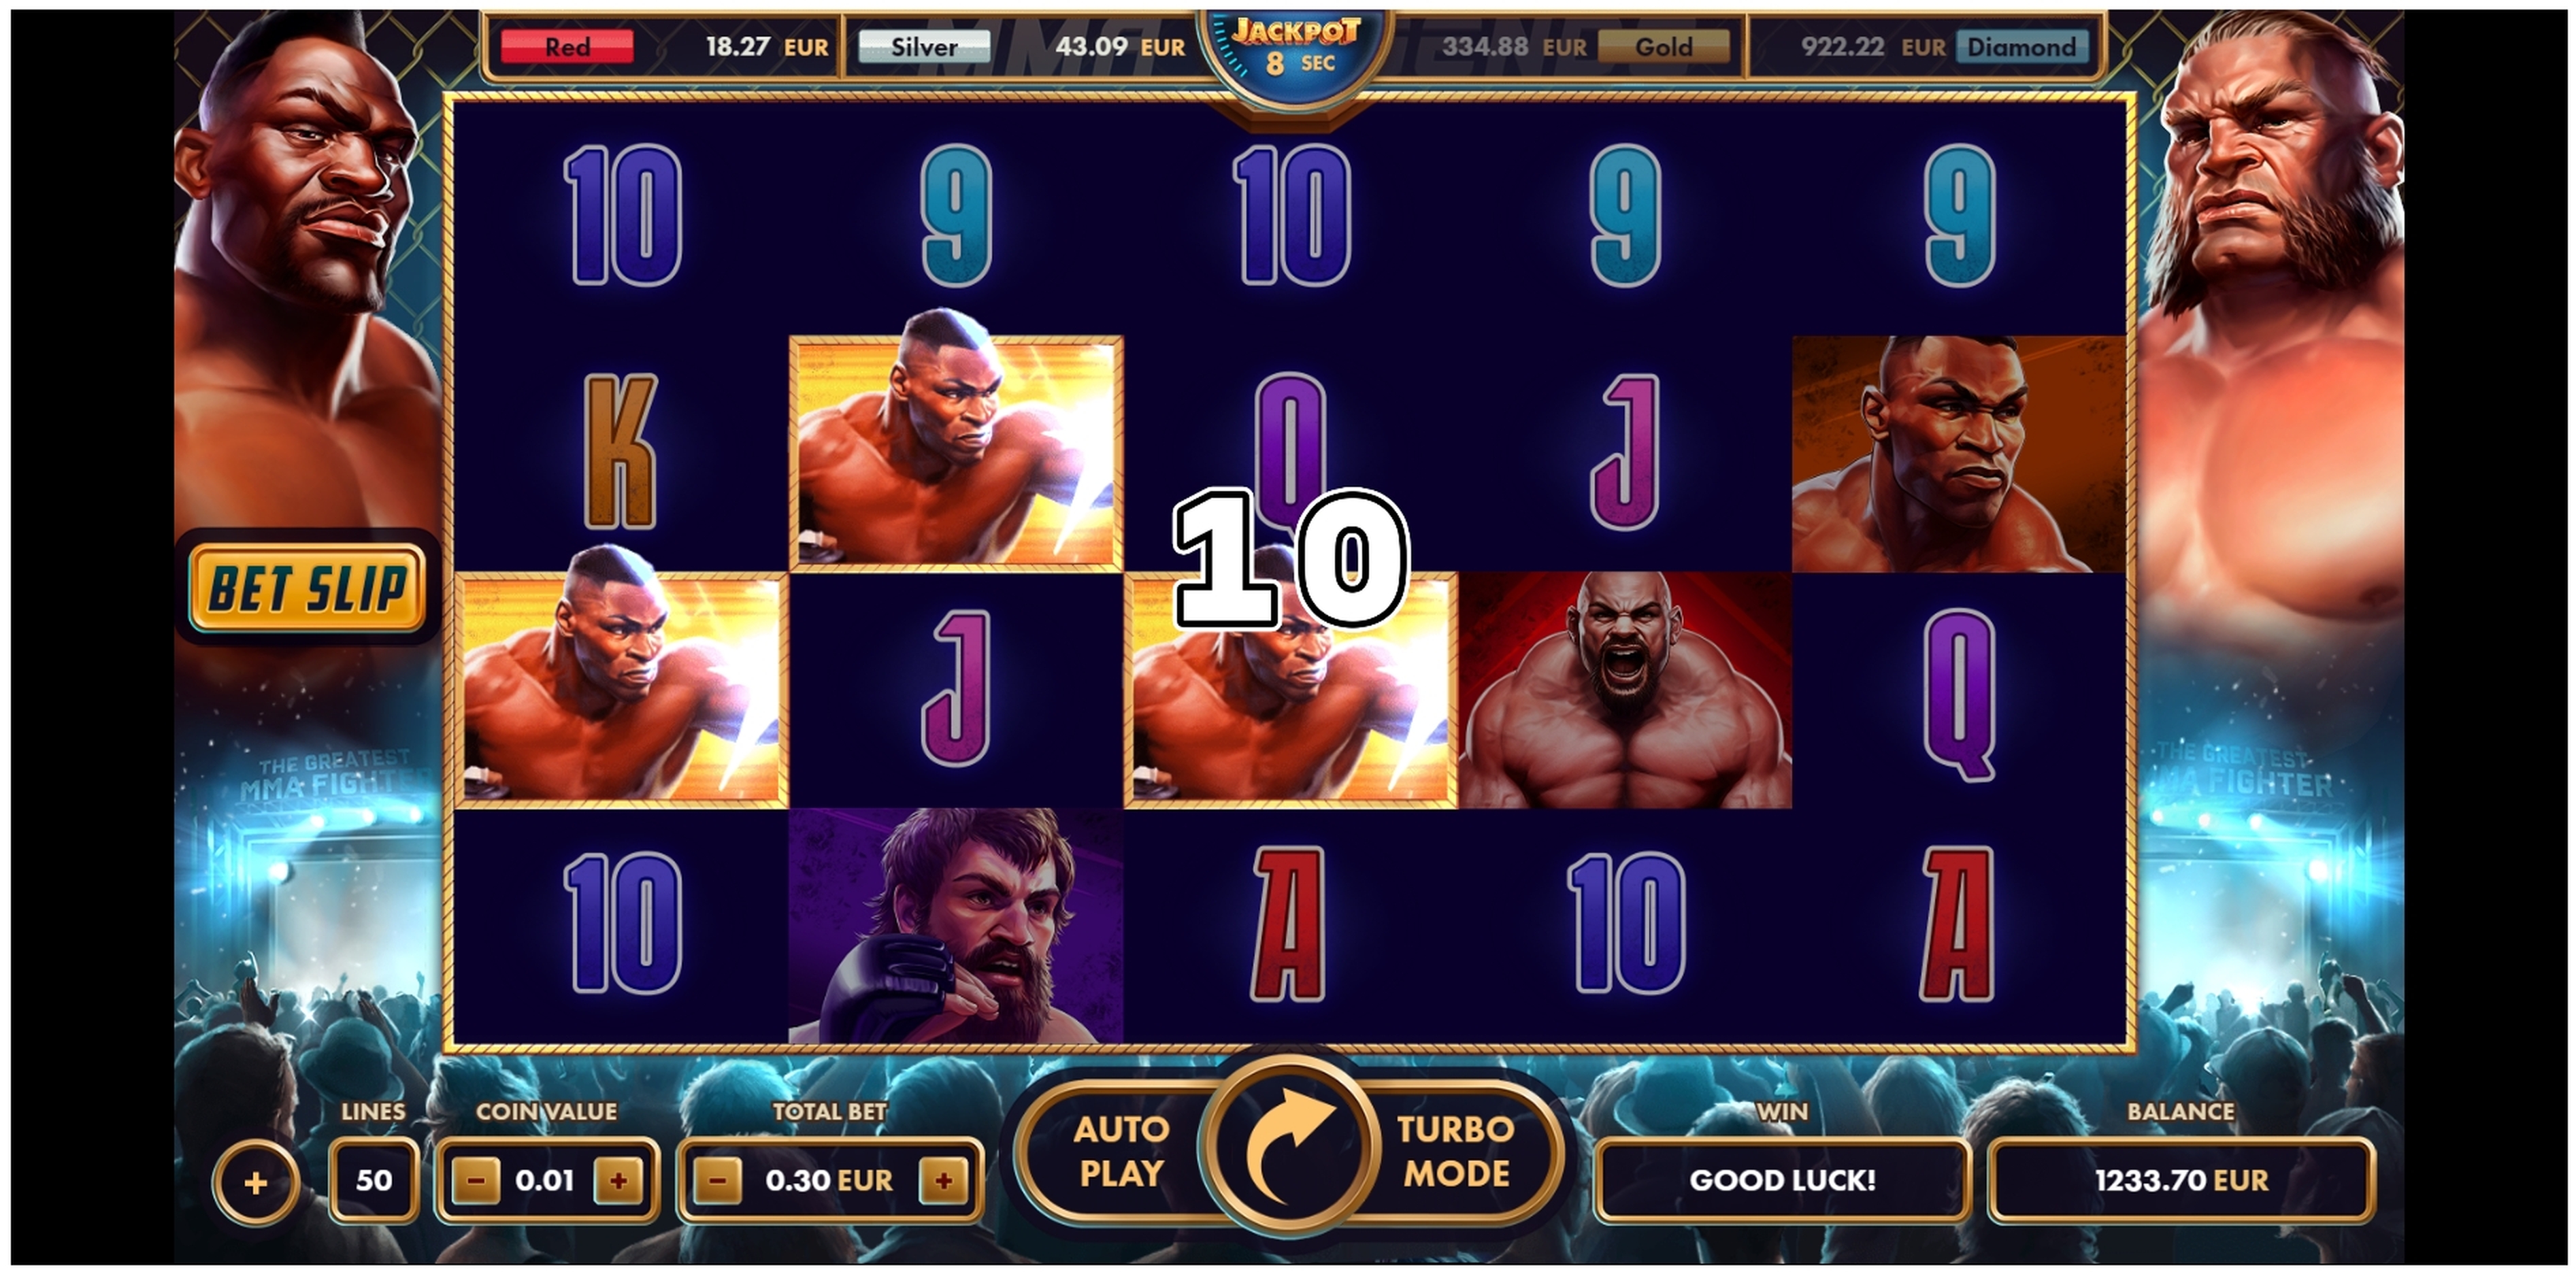 Win Money in MMA Legends Free Slot Game by NetGame